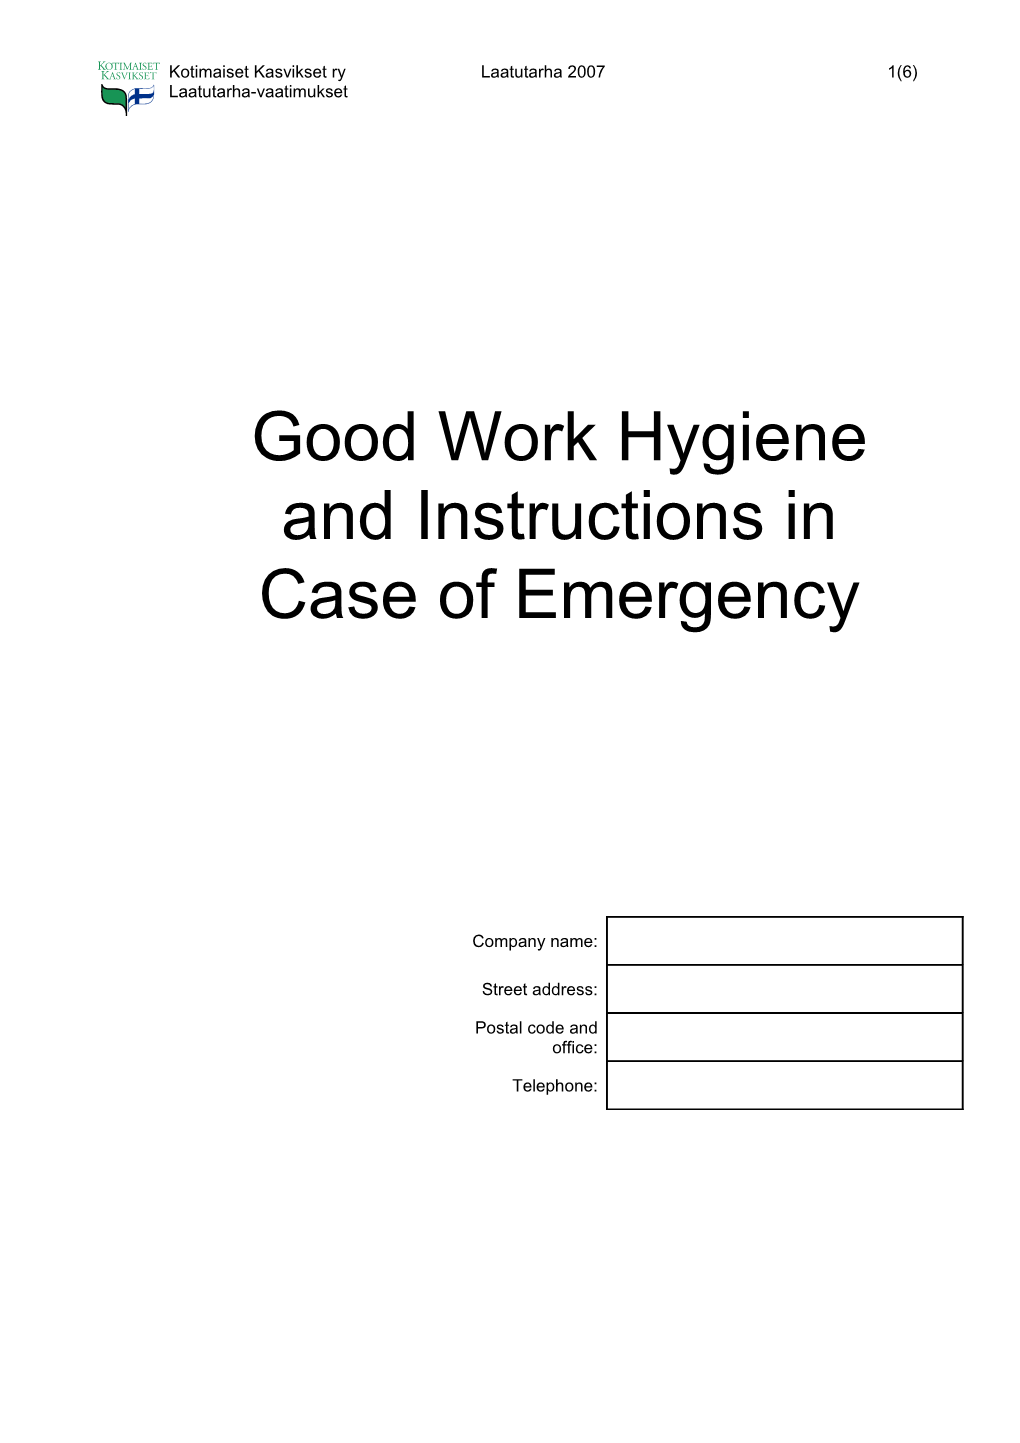 Good Work Hygiene and Instructions in Case of Emergency